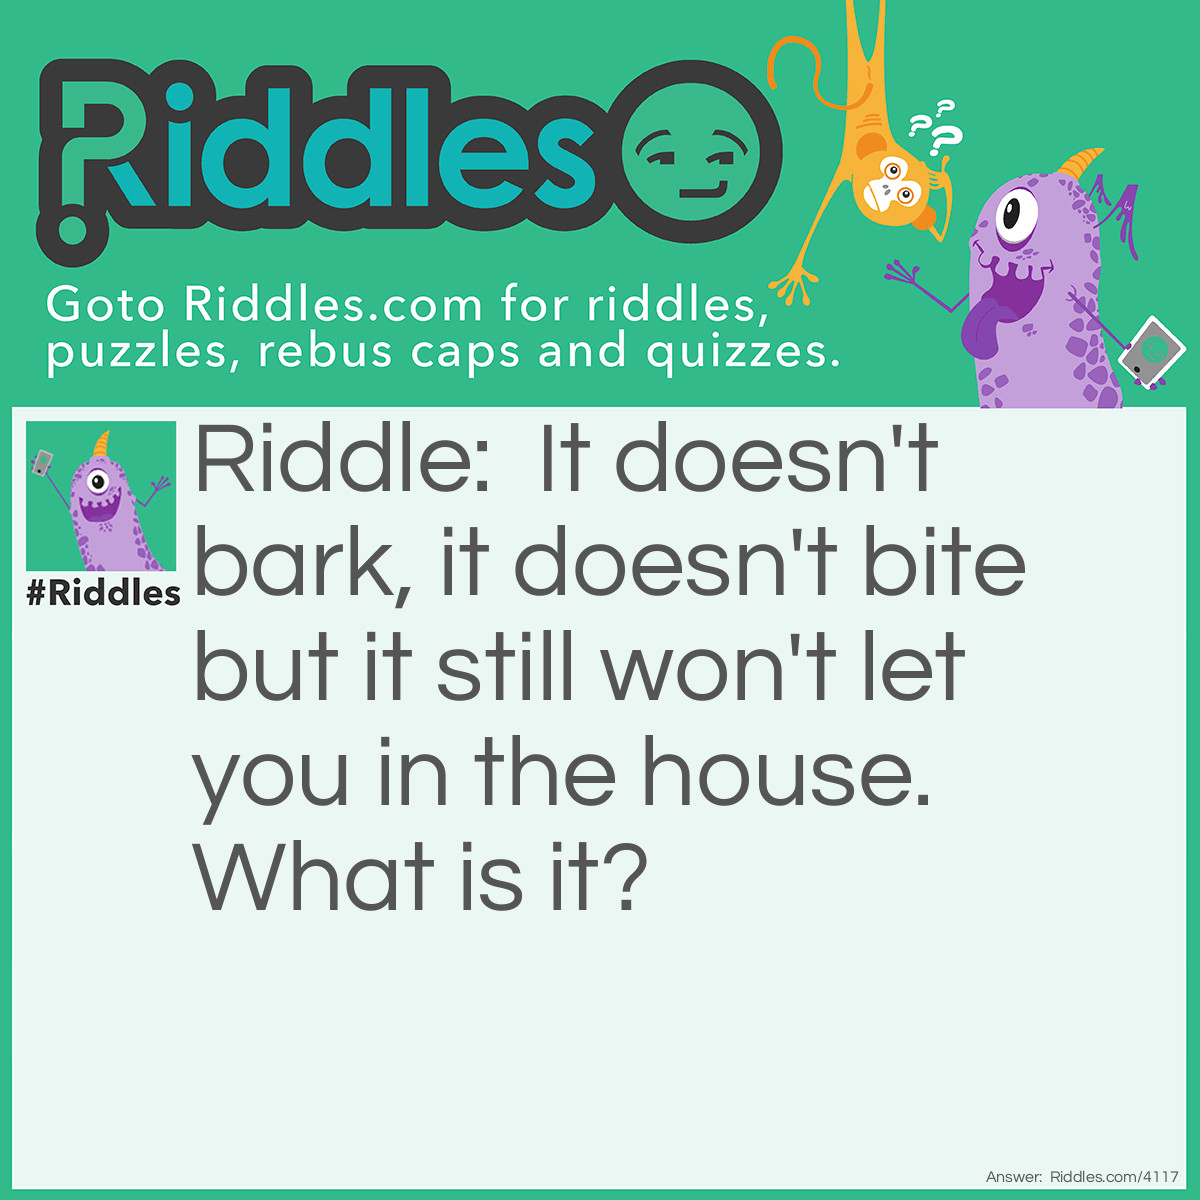 Riddle: It doesn't bark, it doesn't bite but it still won't let you in the house. What is it? Answer: A lock.